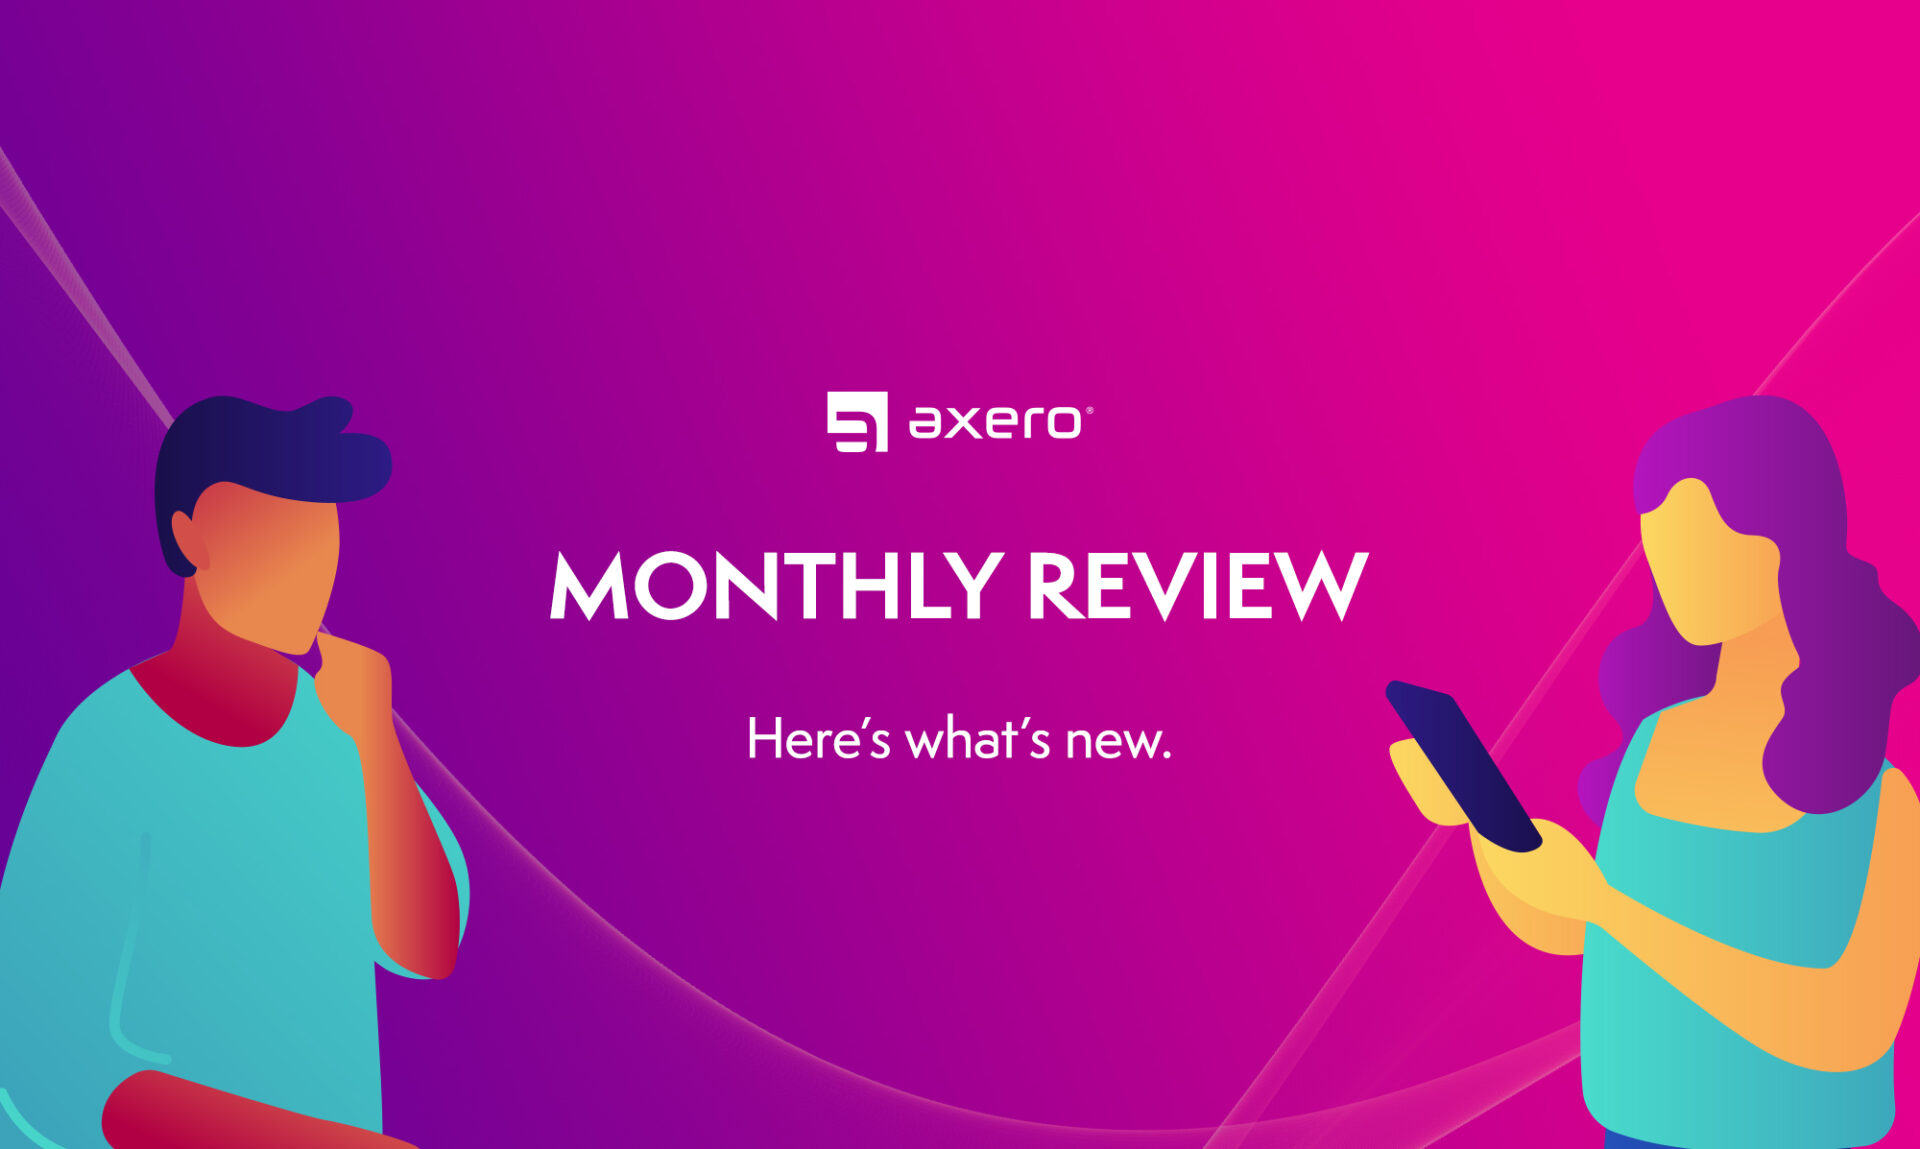 Axero Recognized as Market Leader, New Custom Notifications, and Space Personas